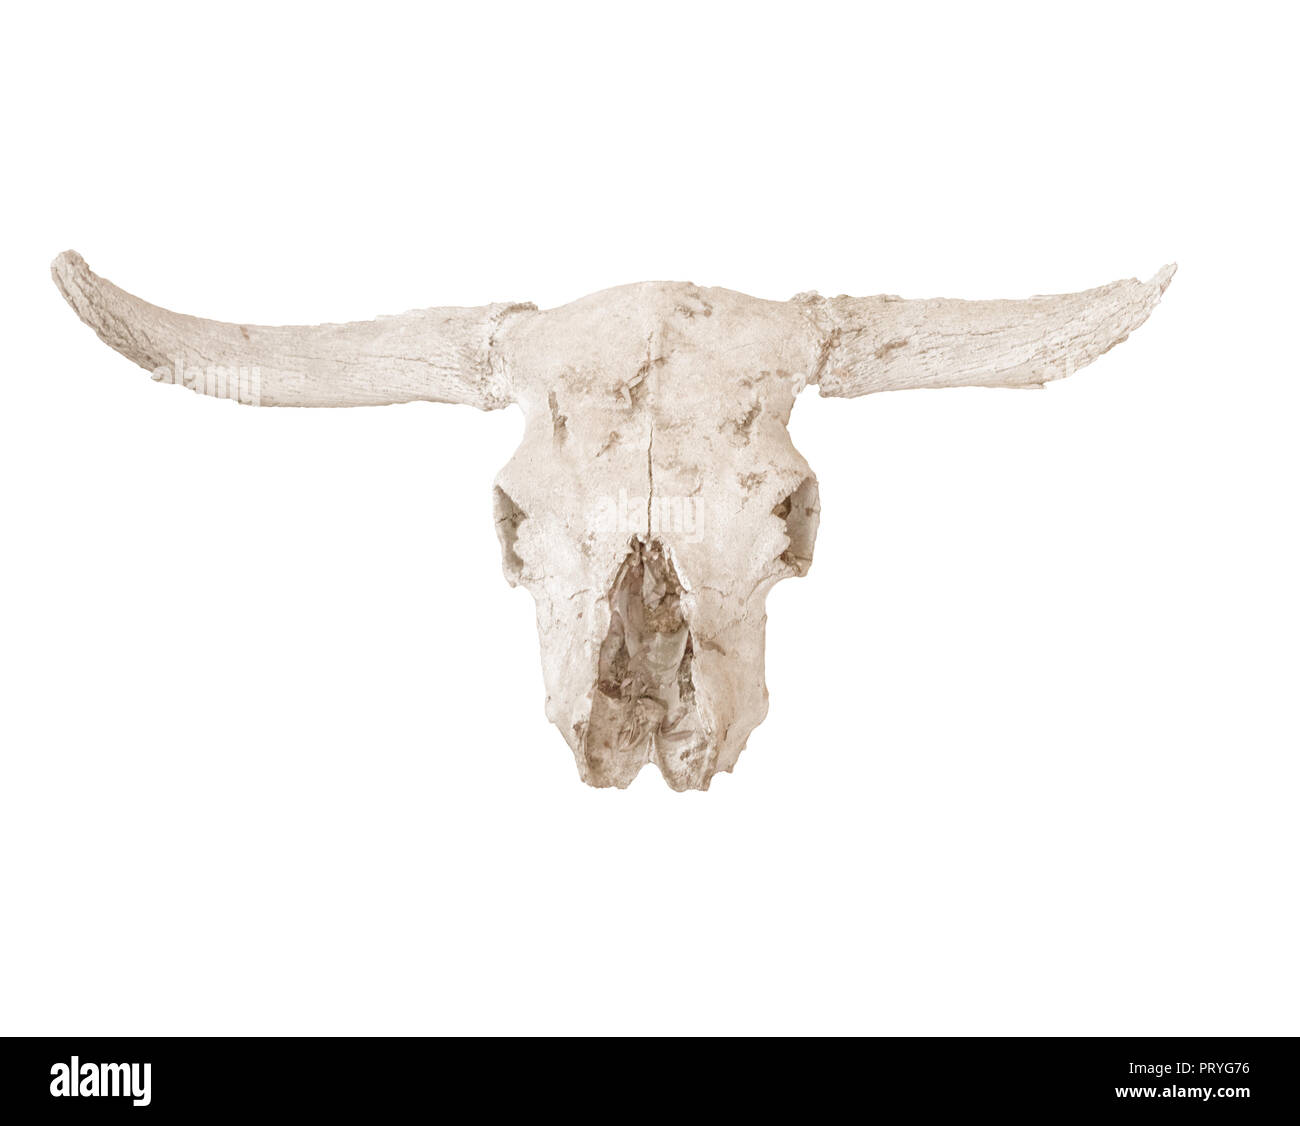 sun bleached cow skull closeup isolated on a white background Stock Photo